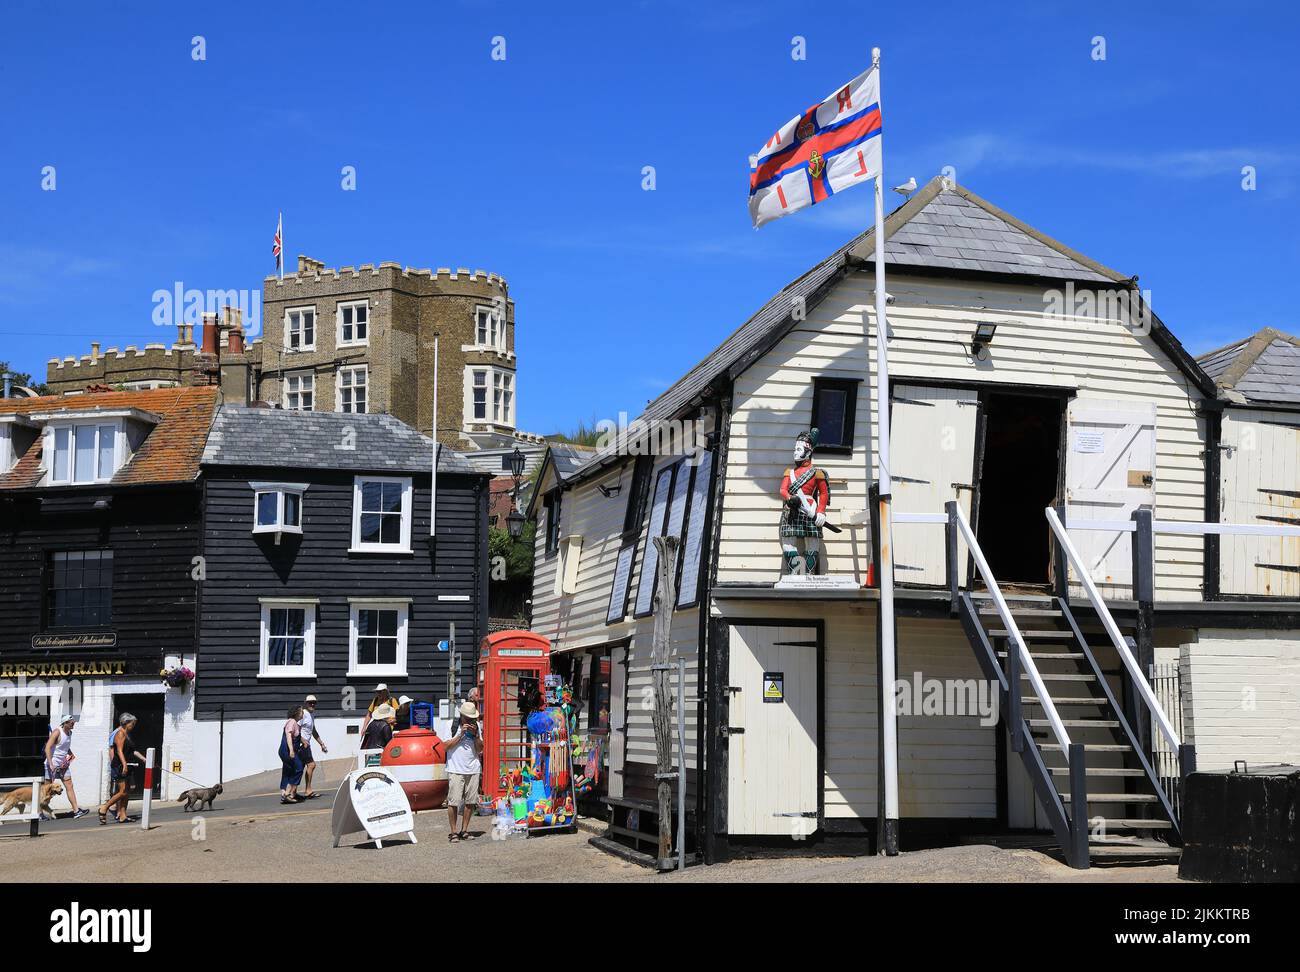 The old harbour master's house and life-boat station in Broadstairs, with Bleak House, of Charles Dickens fame, beyond, in Kent, UK Stock Photo